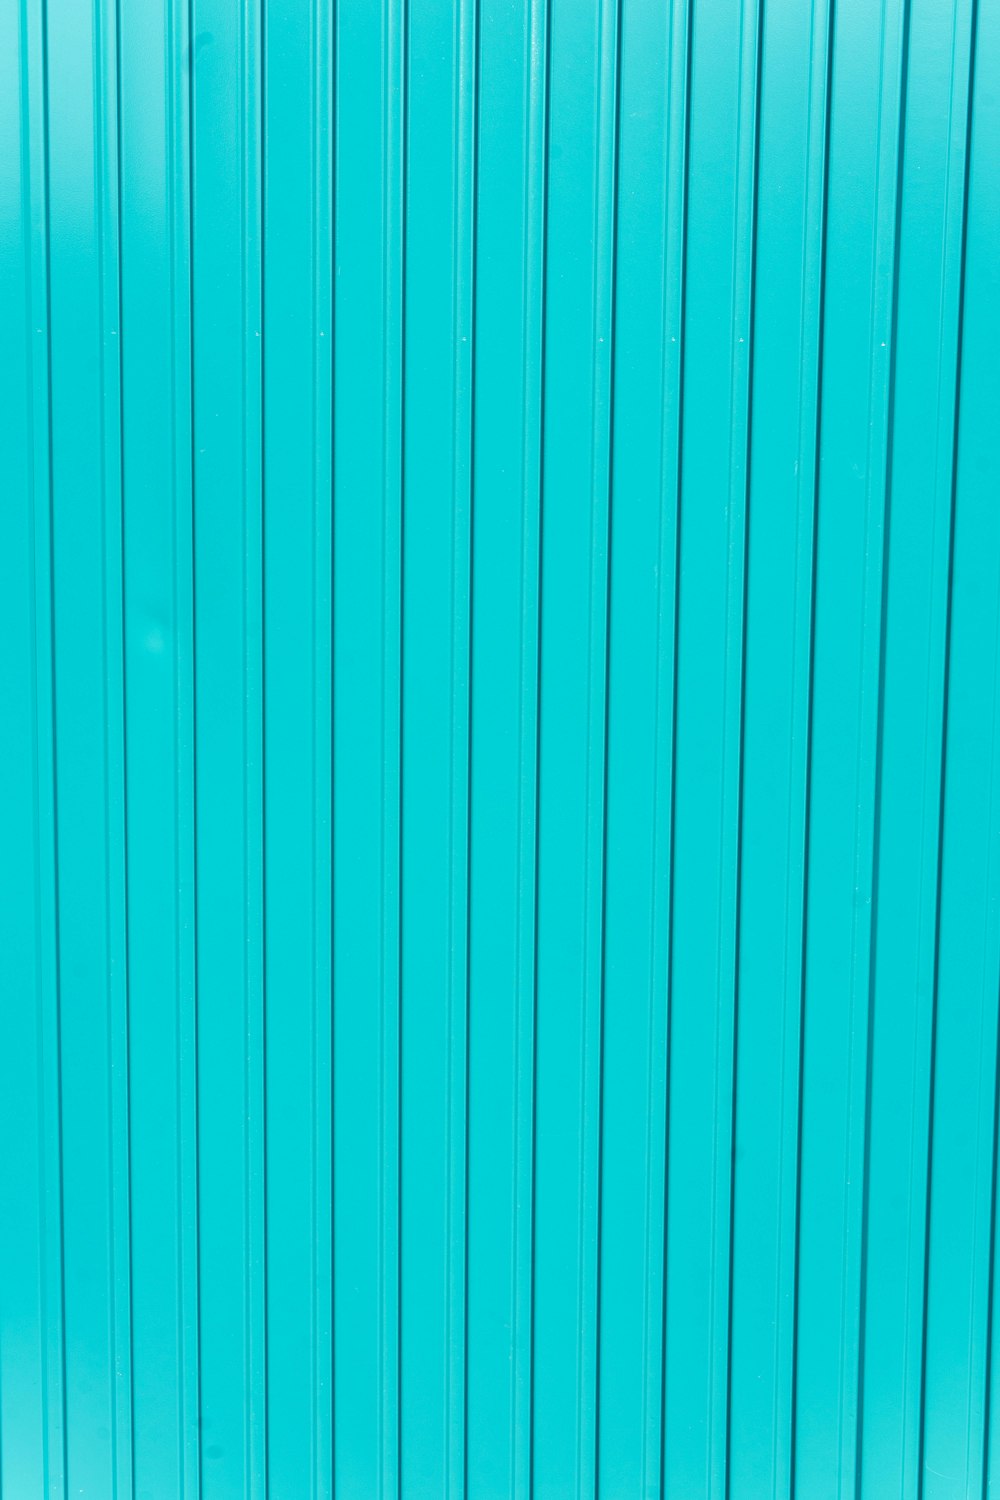 teal and white striped textile